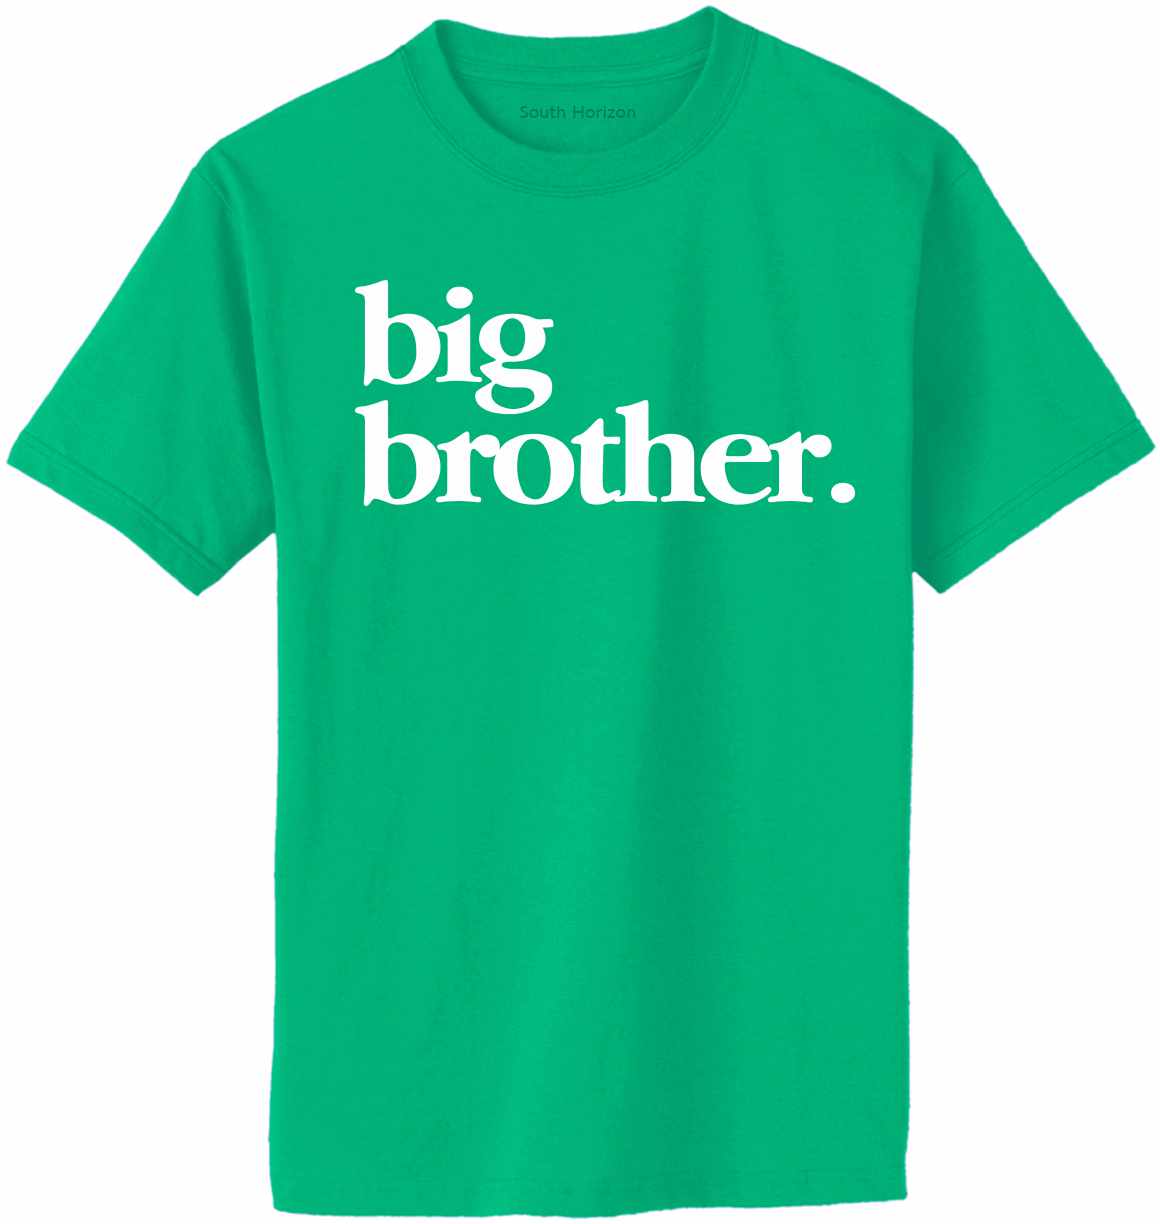 Big Brother on Adult T-Shirt (#1320-1)